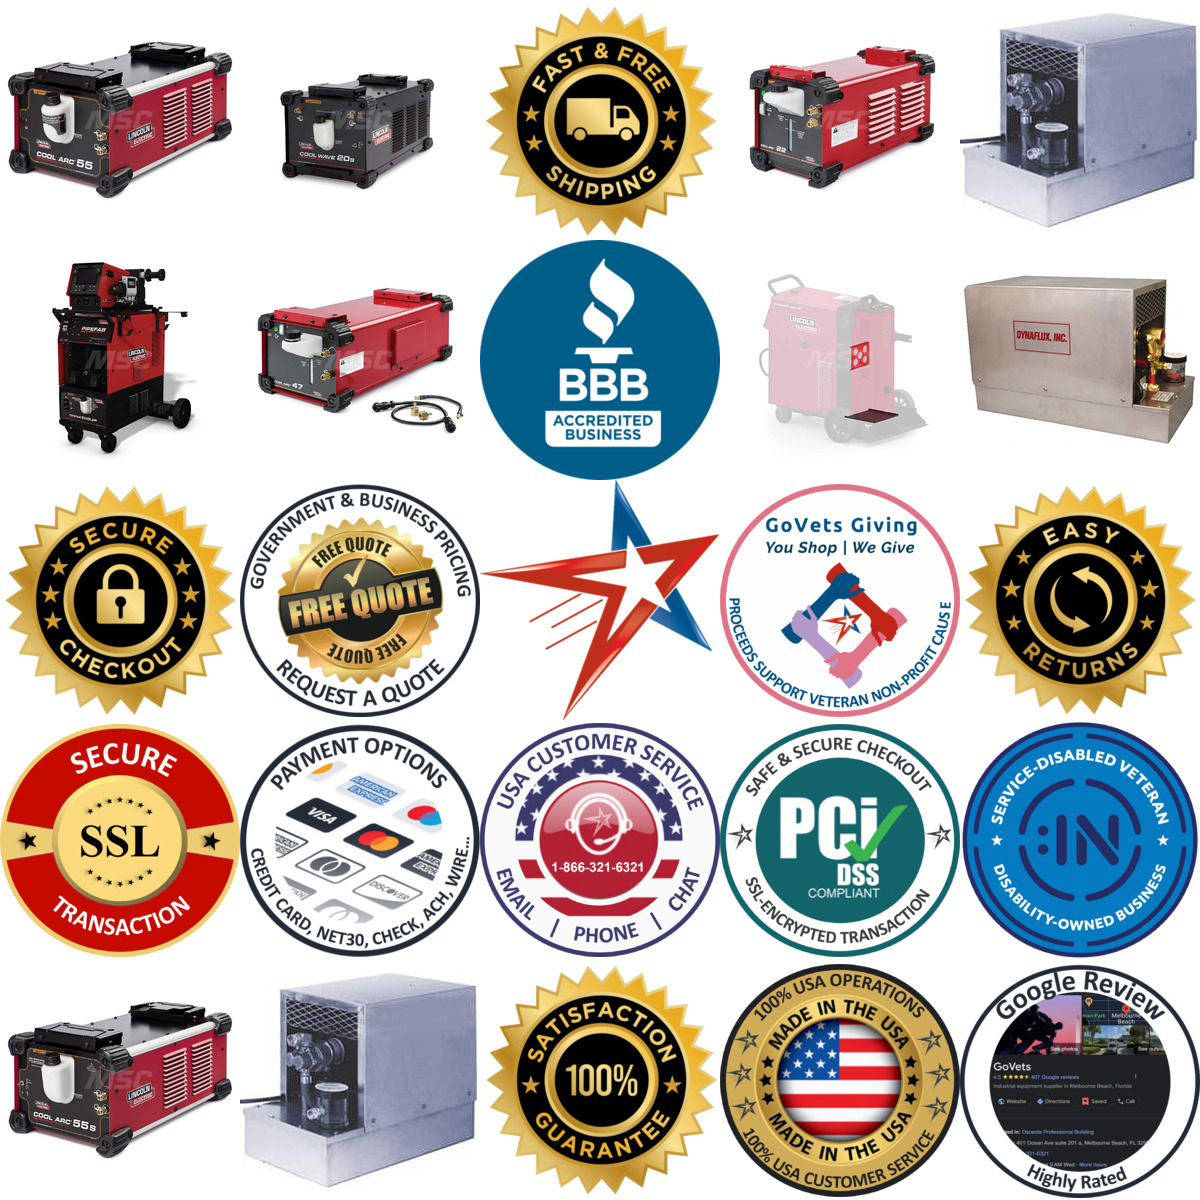 A selection of Welding Water Coolers products on GoVets